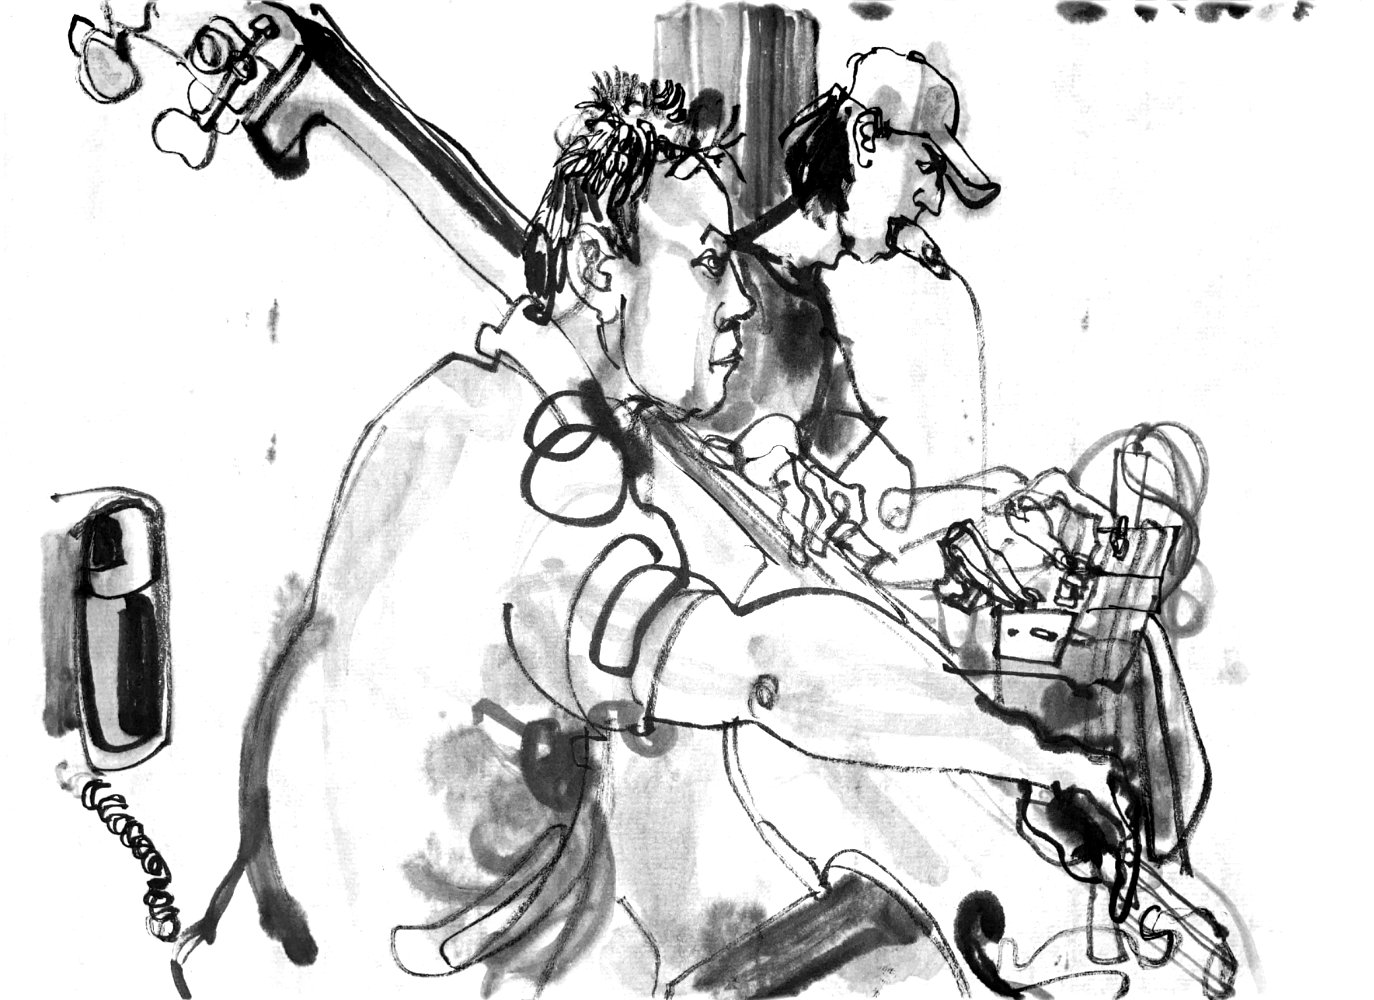 Ink drawing of two male musicians, both facing to the right. In front is a double bass player, playing with a bow. In the back is a man with a small short microphone. he is holding wit his teeth, his hands are manipulating electronic devices on a desk in front of him.